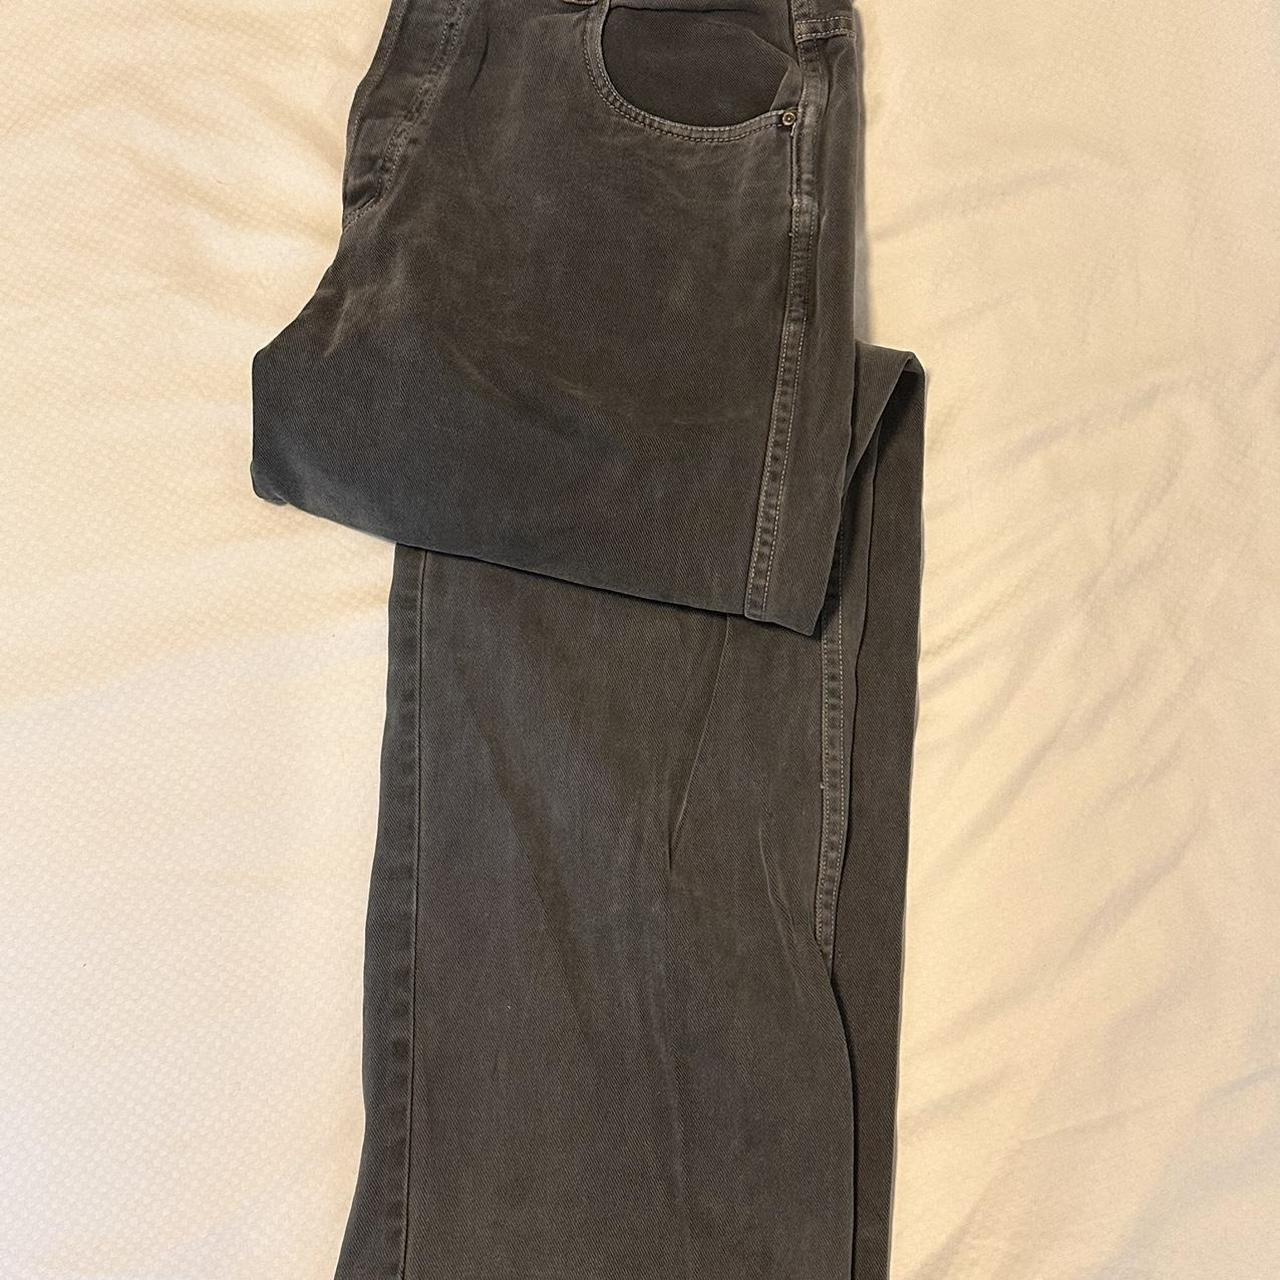 Mossimo Vintage Jeans Charcoal Grey 34inch 106cm... - Depop